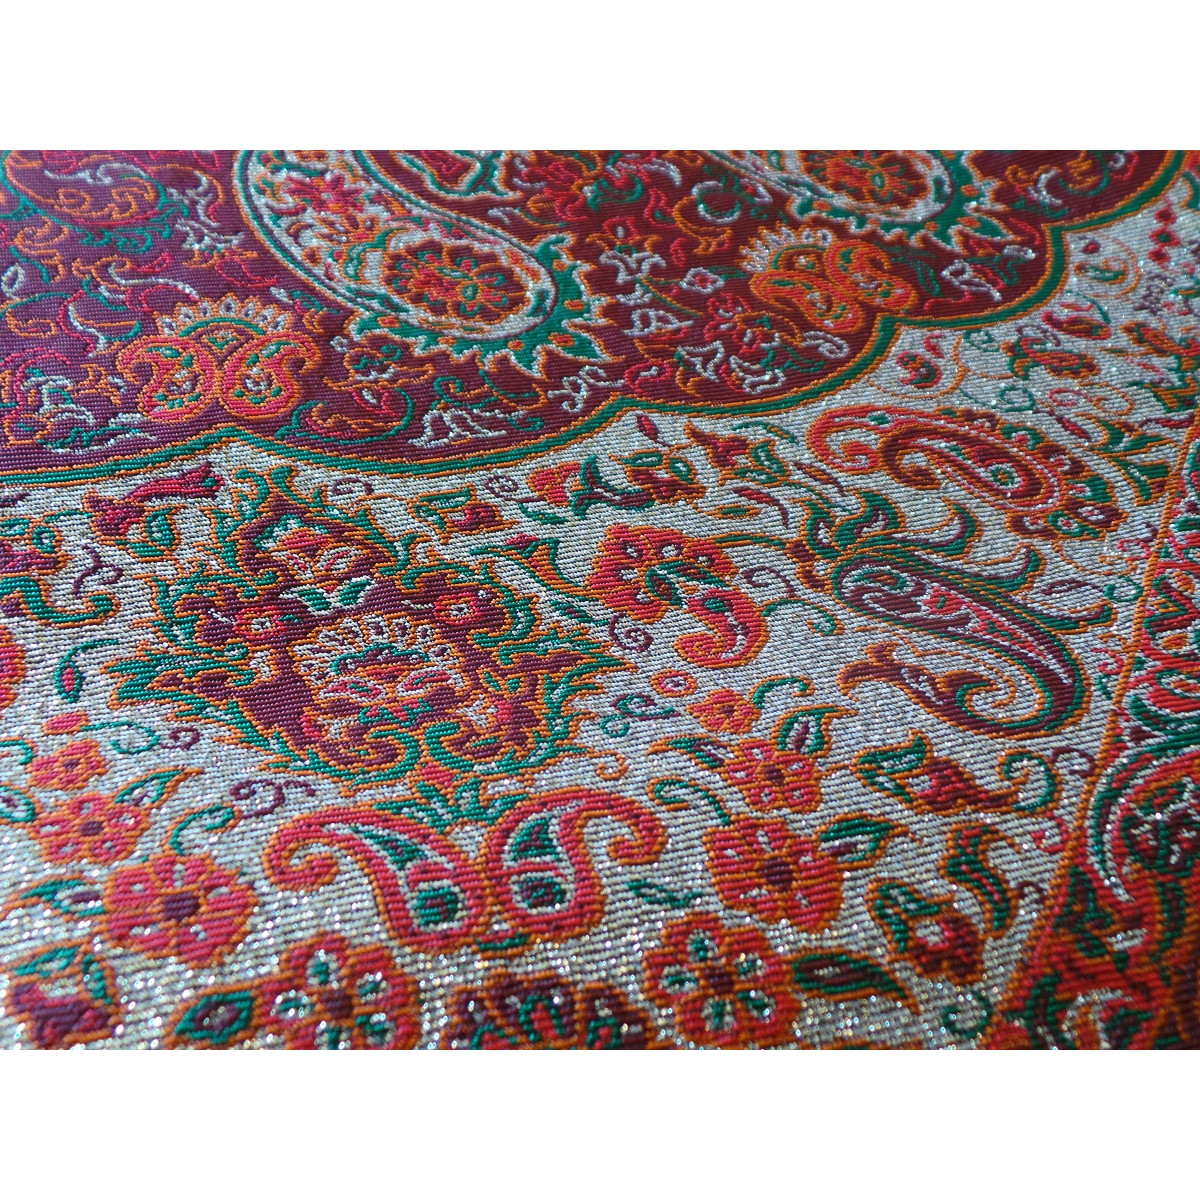 Termeh Luxury Tablecloth/Cushion Cover - HT2065-Persian Handicrafts